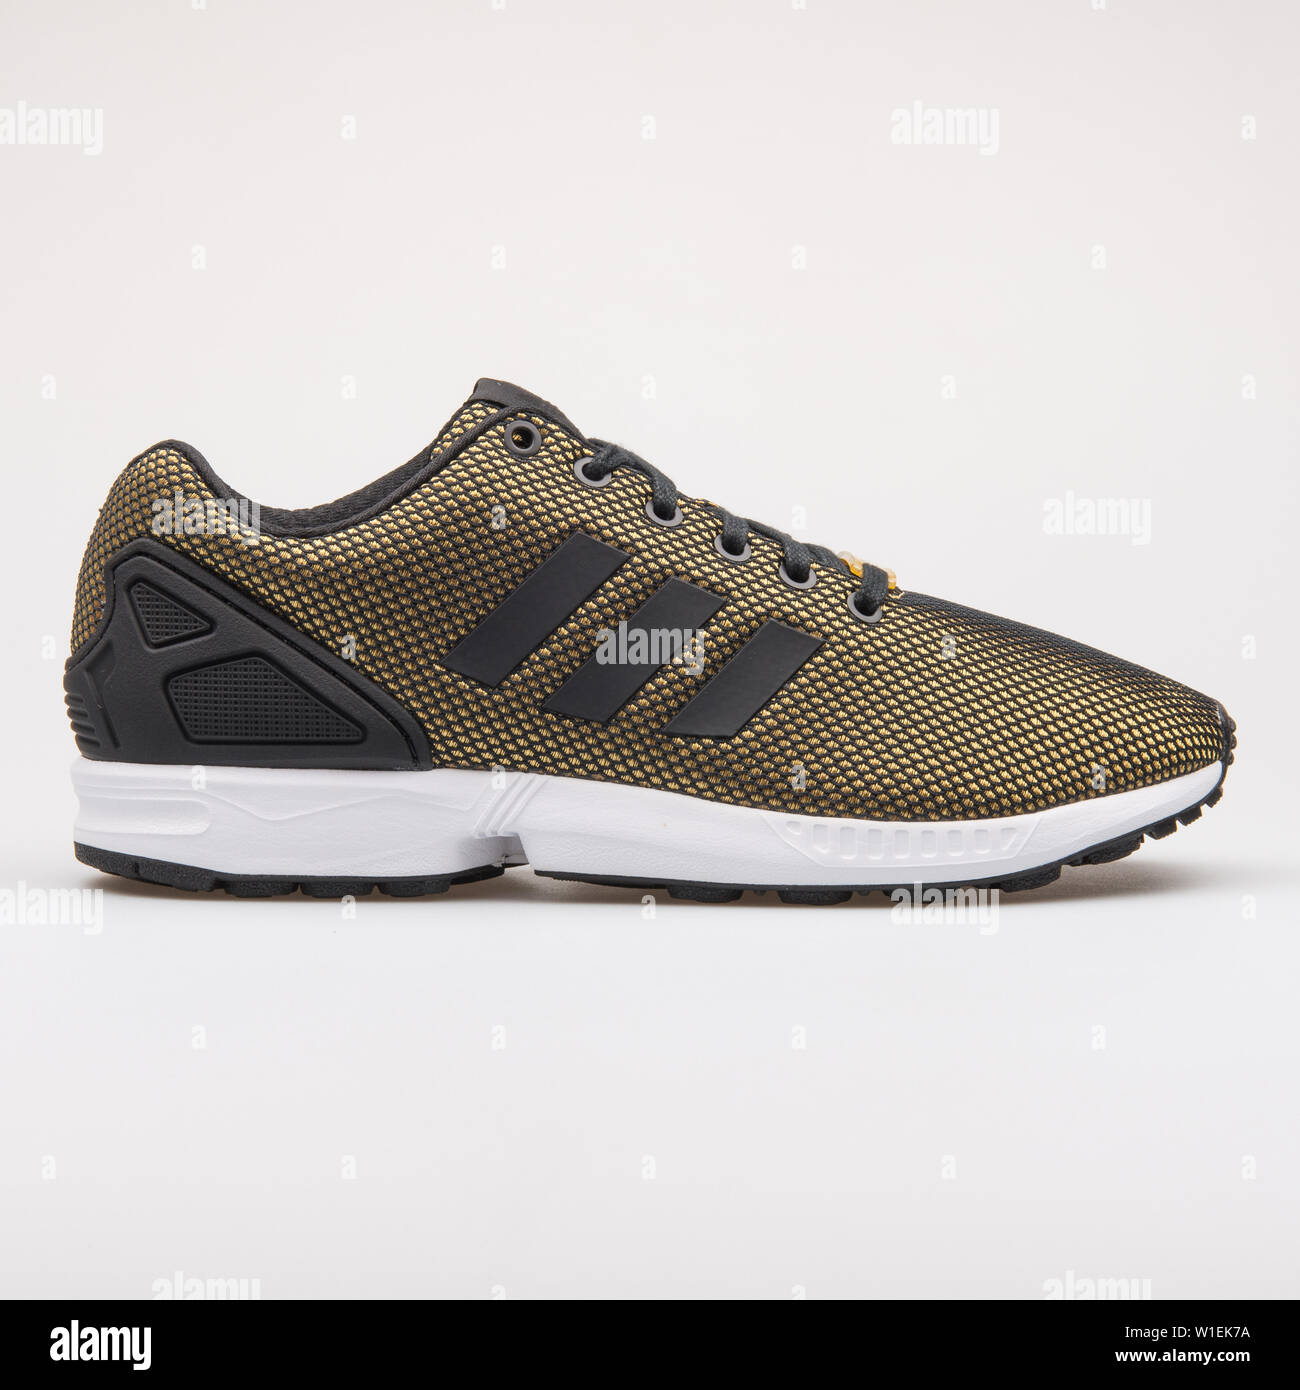 adidas flux black and gold mens